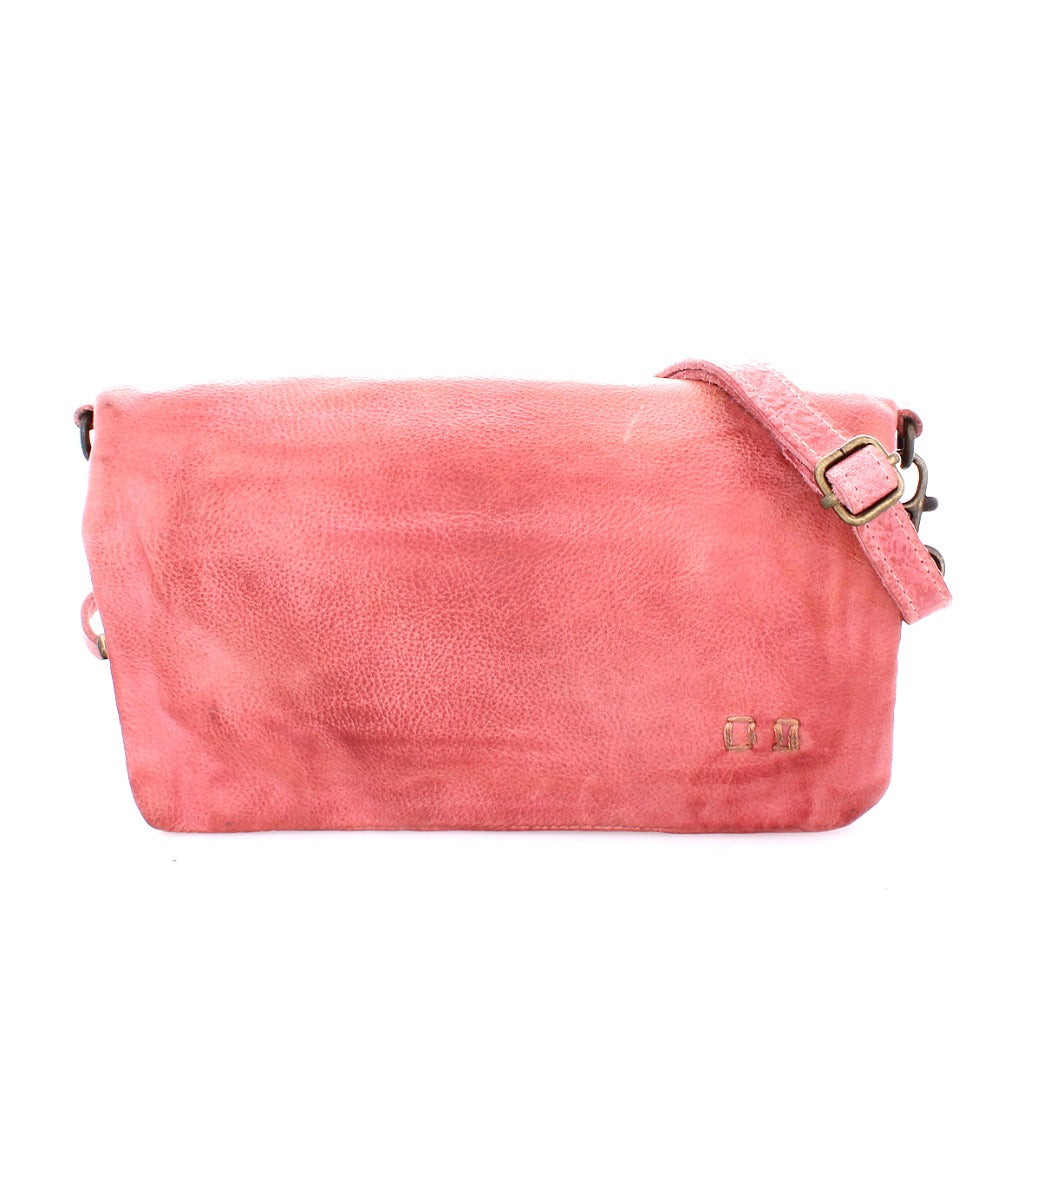 A pink leather Cadence crossbody bag with an adjustable strap from Bed Stu.